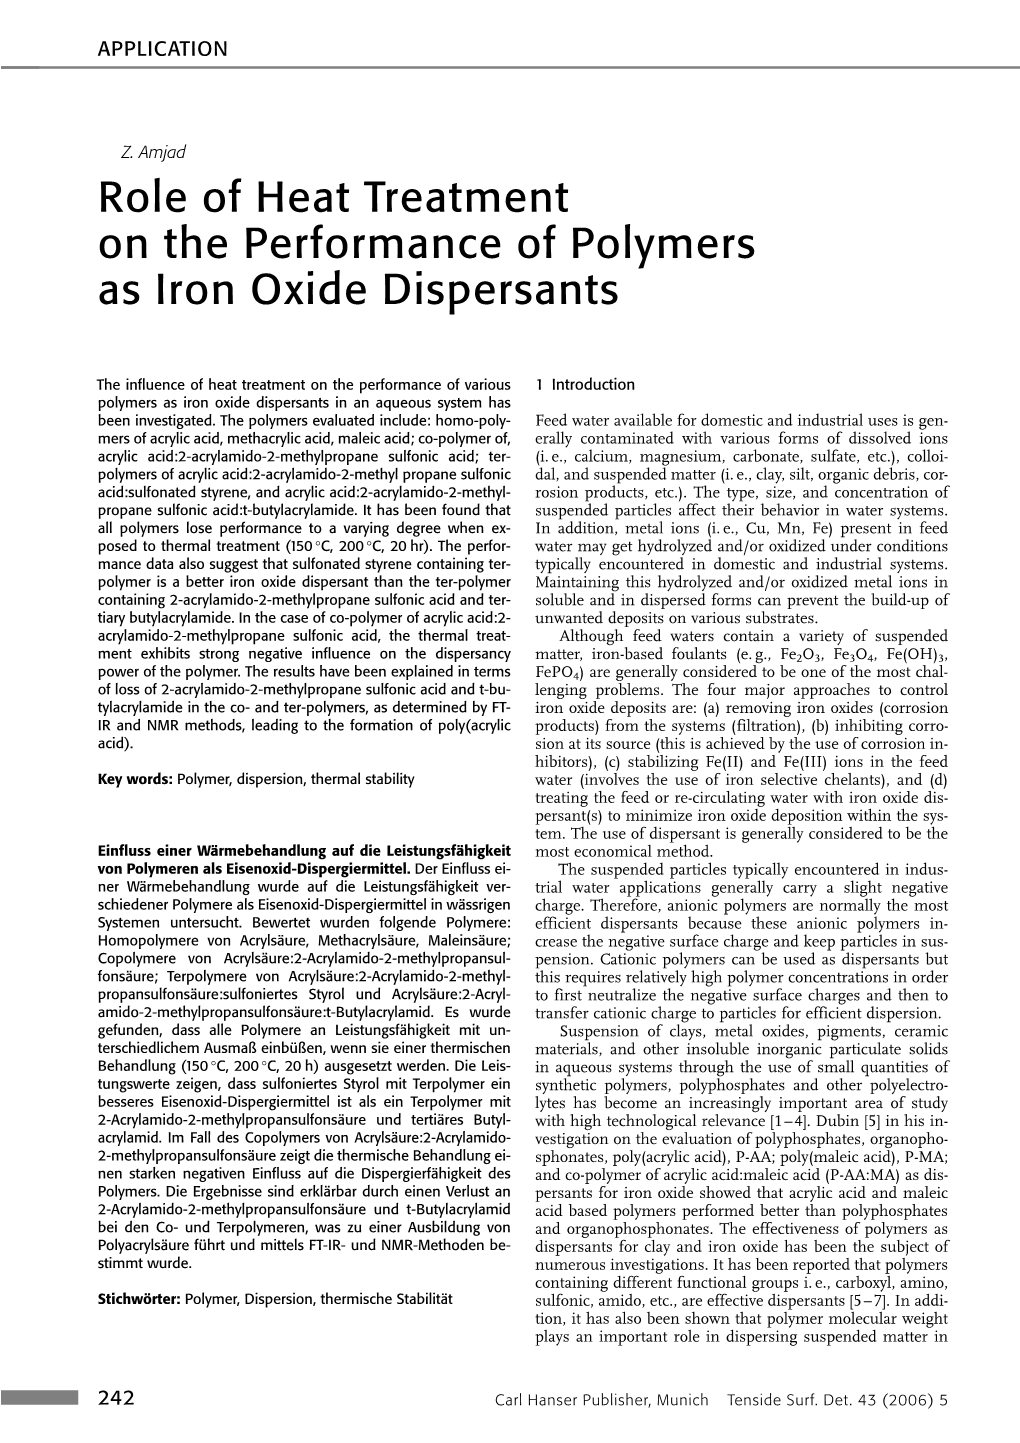 Role of Heat Treatment on the Performance of Polymers As Iron Oxide Dispersants